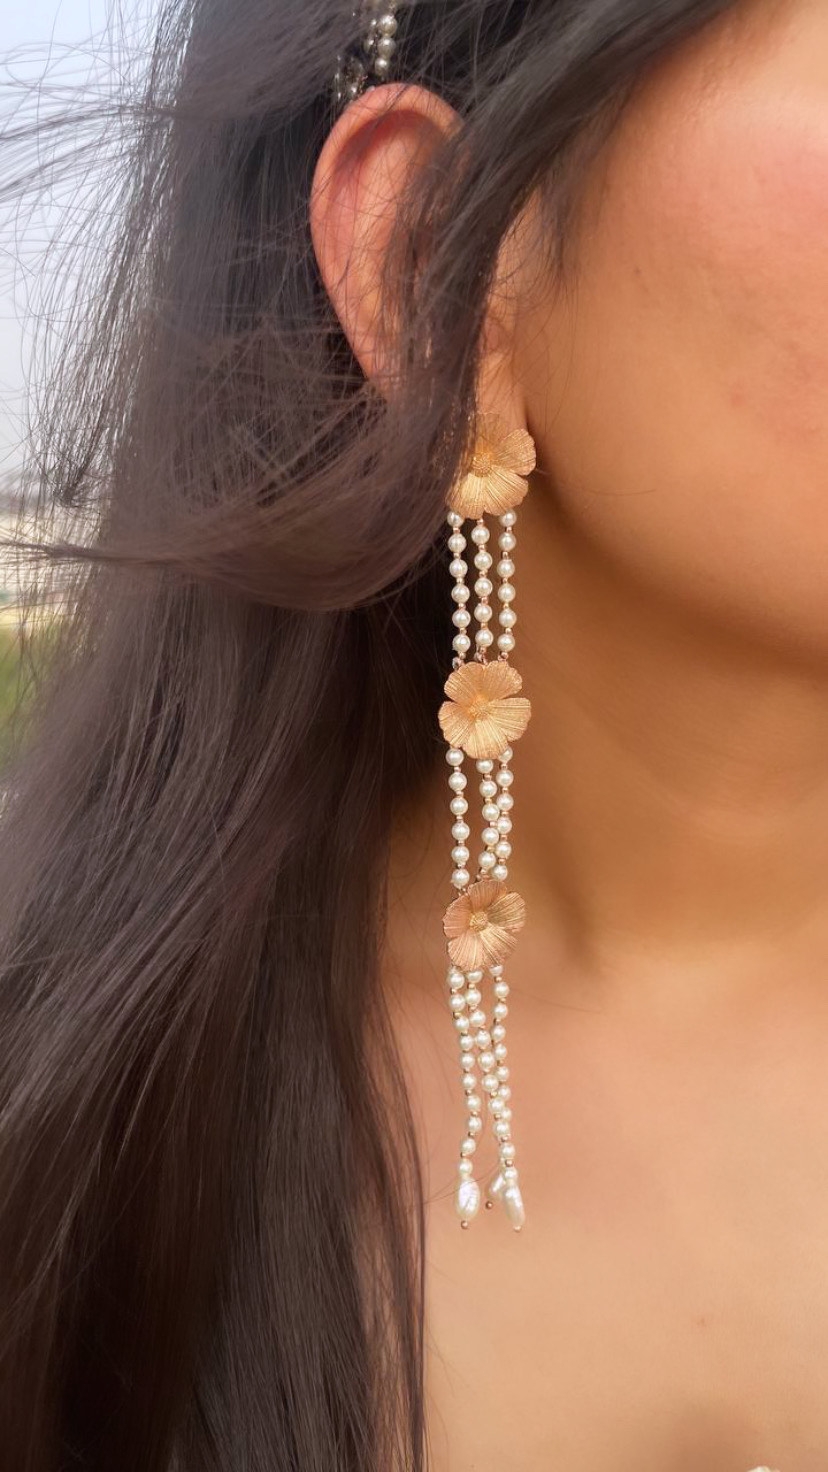 PARISHRI JEWELLERY | Royal Floral dream earrings in white undefined